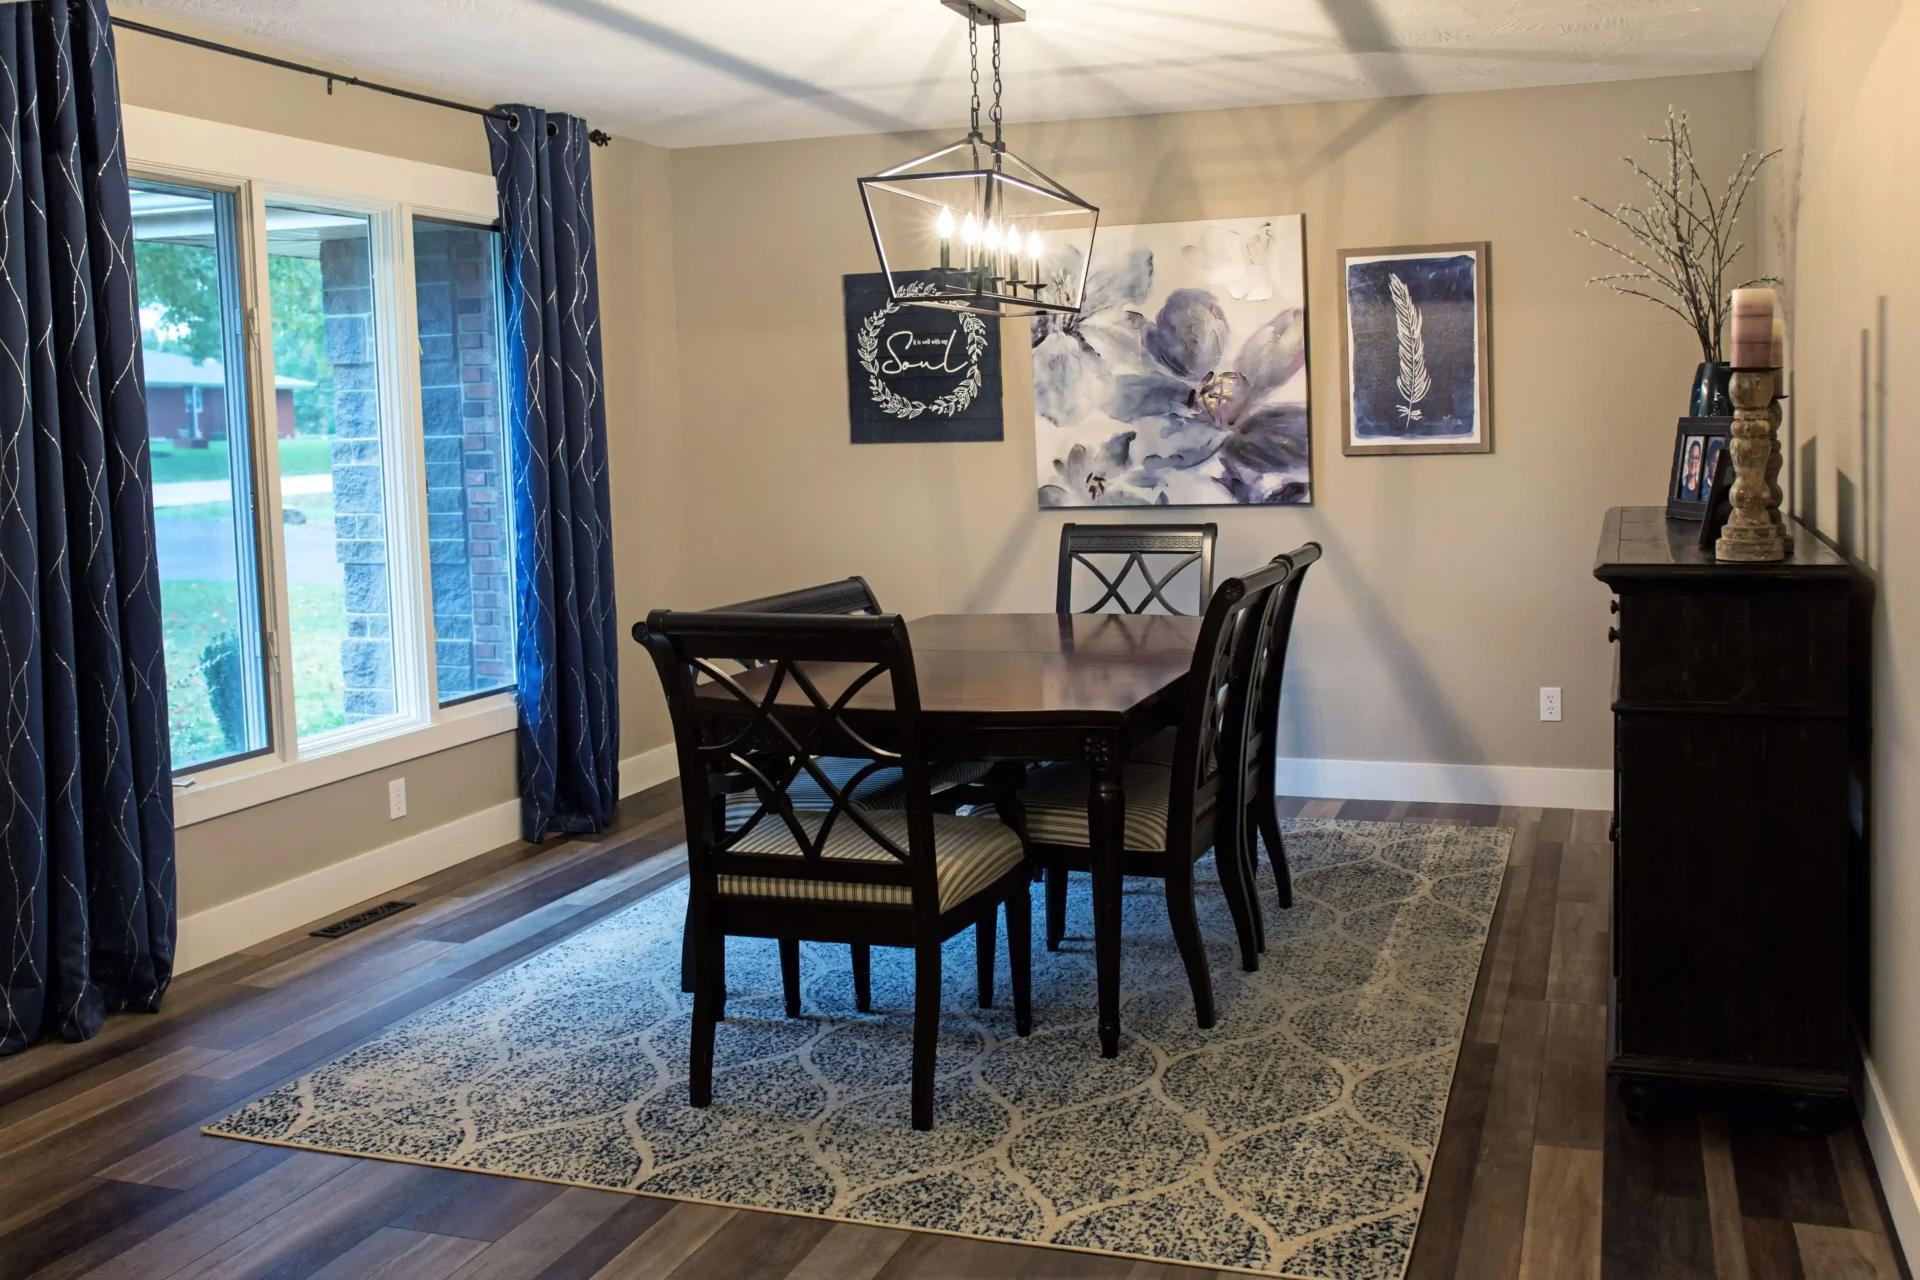 A dining room for a small dining table